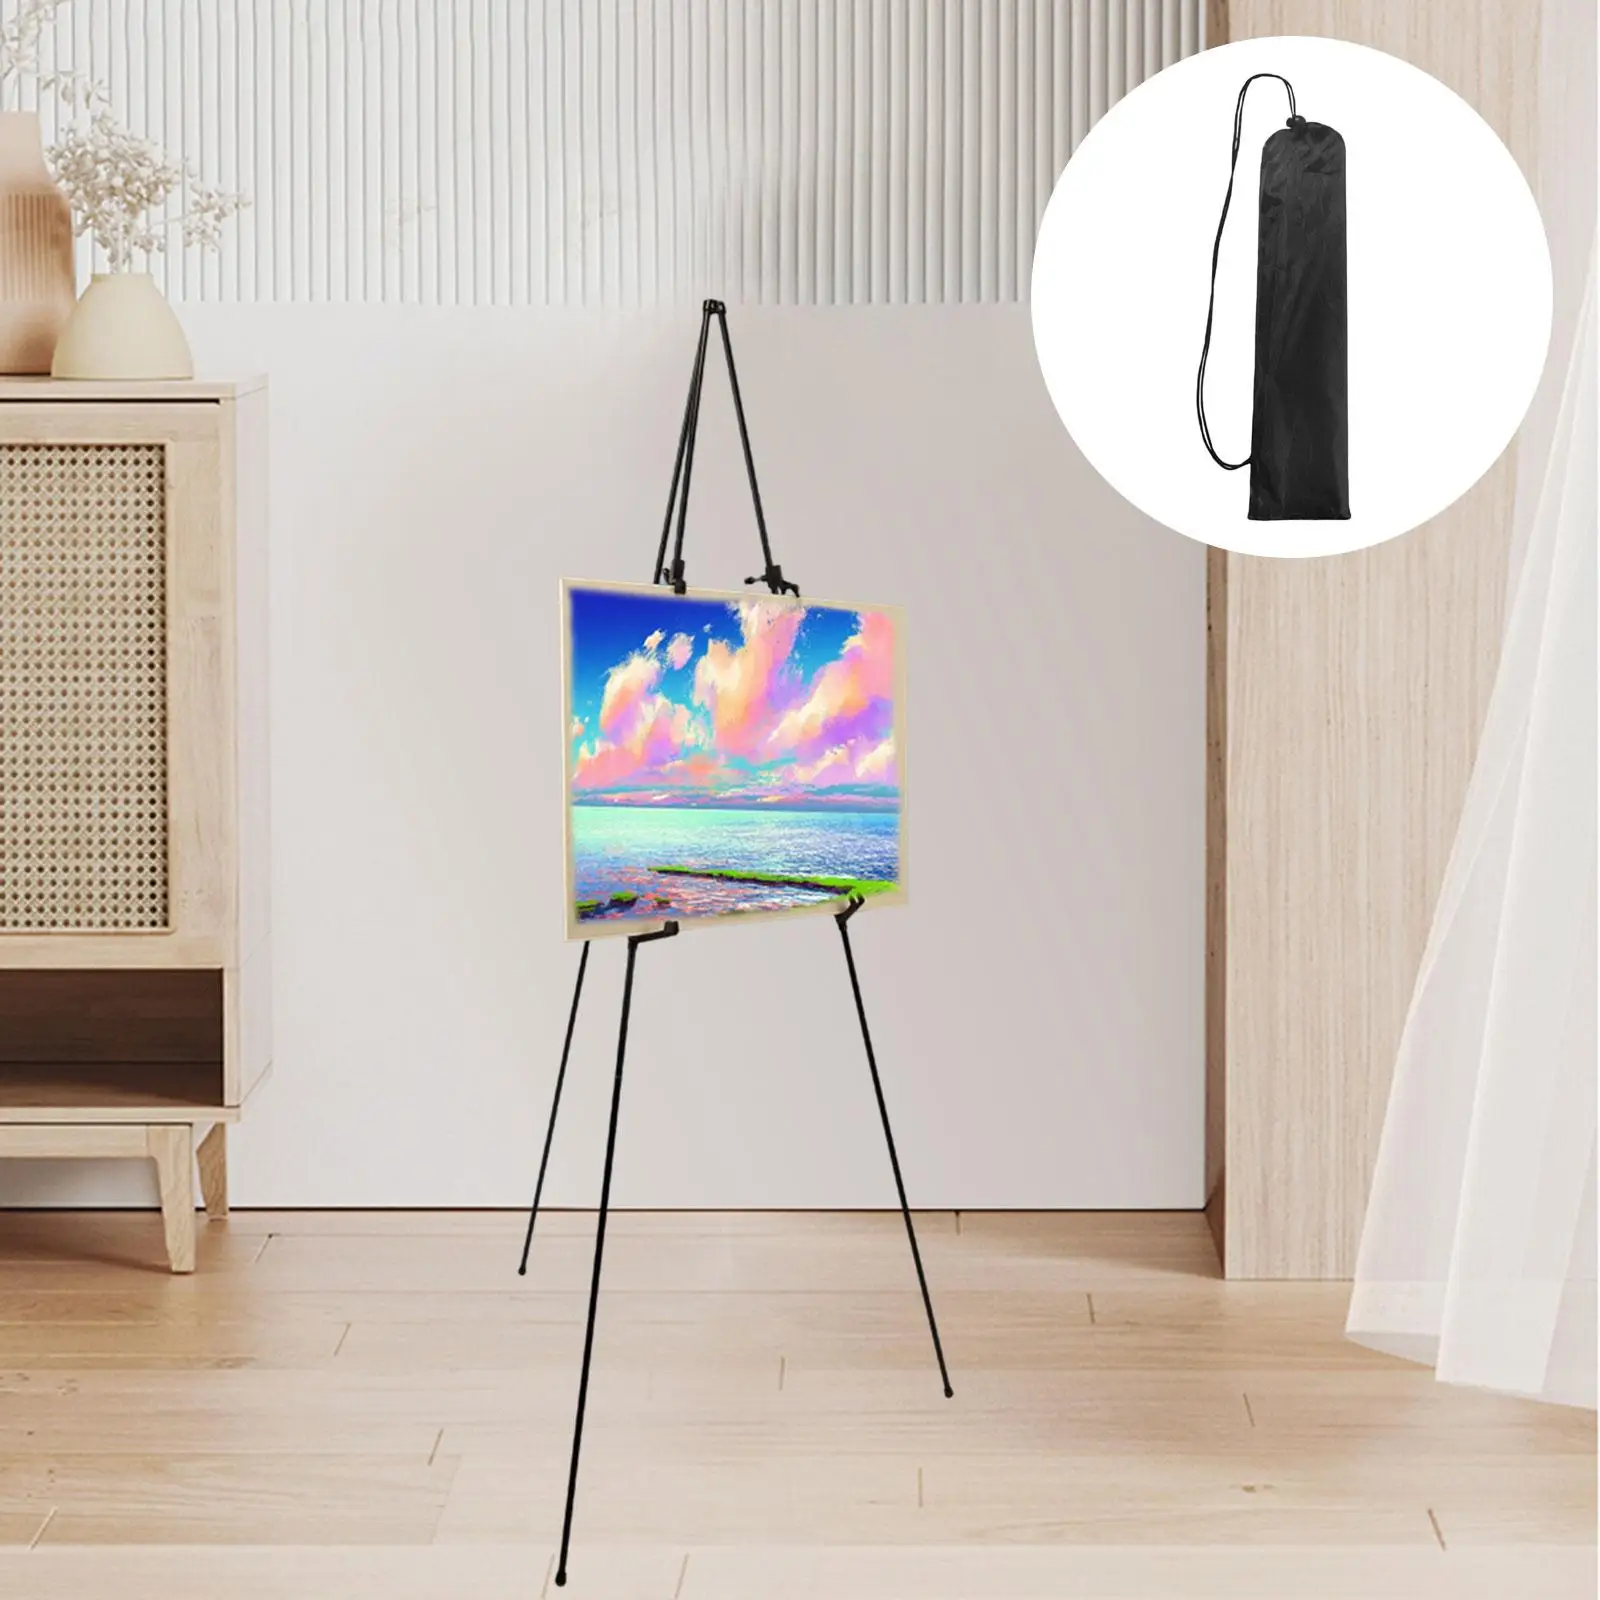 Tripod Display Easel Stand Holder Folding Portable Displaying Art Posters Easel for Photo Frame Party Home